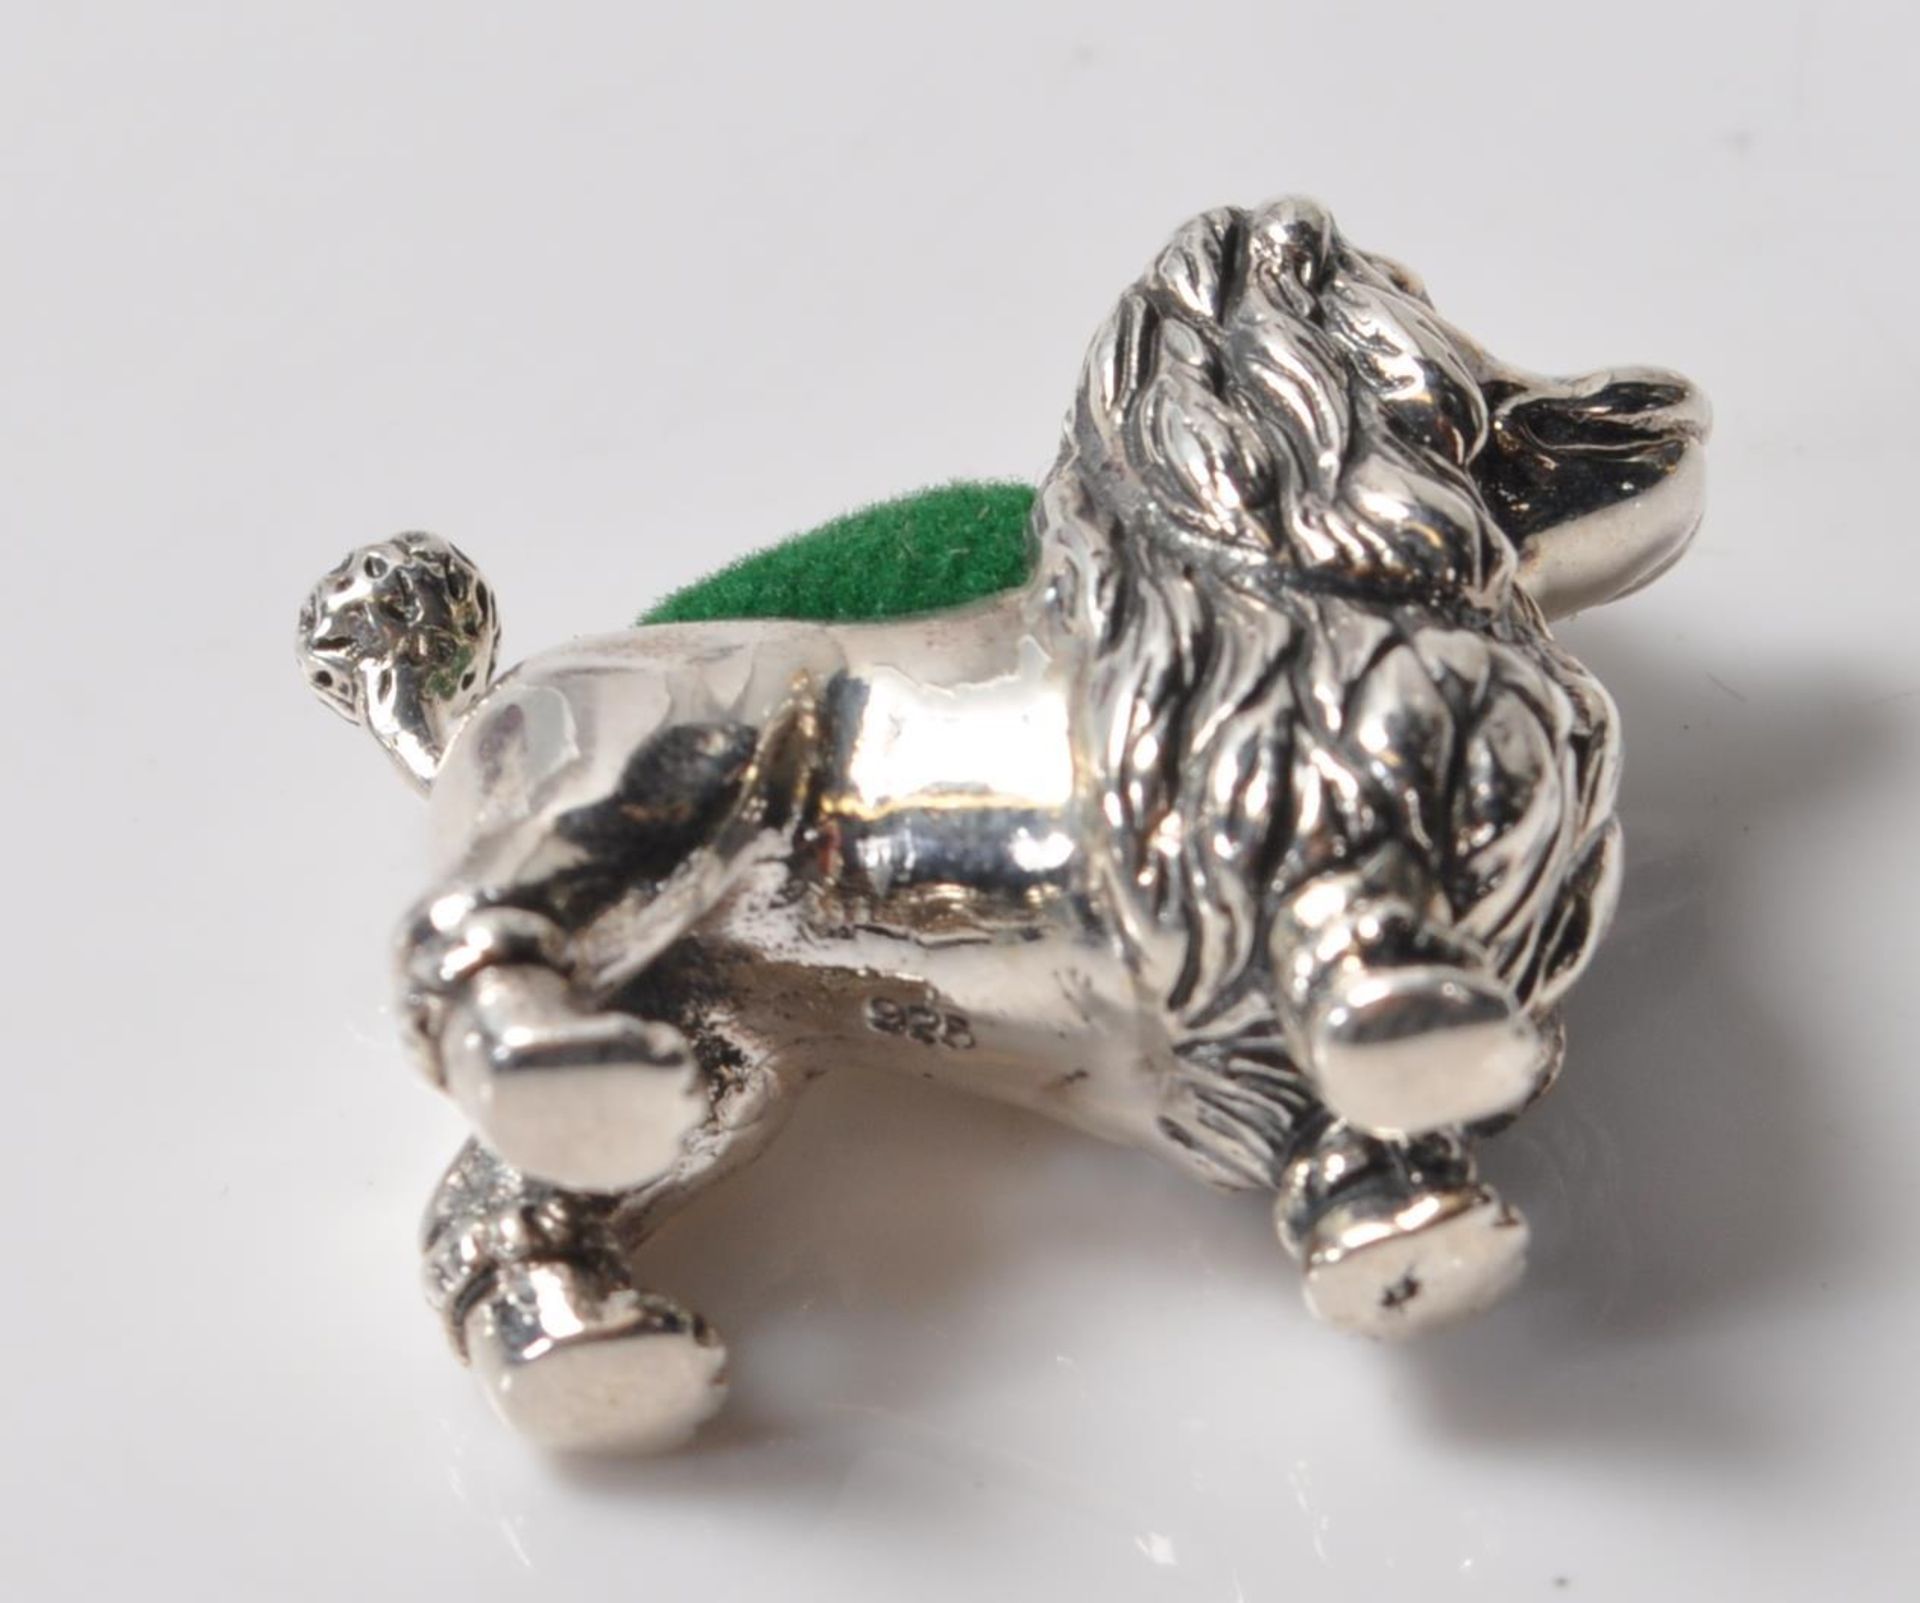 STAMPED 925 SILVER PIN CUSHION IN THE FORM OF A POODLE. - Image 5 of 5